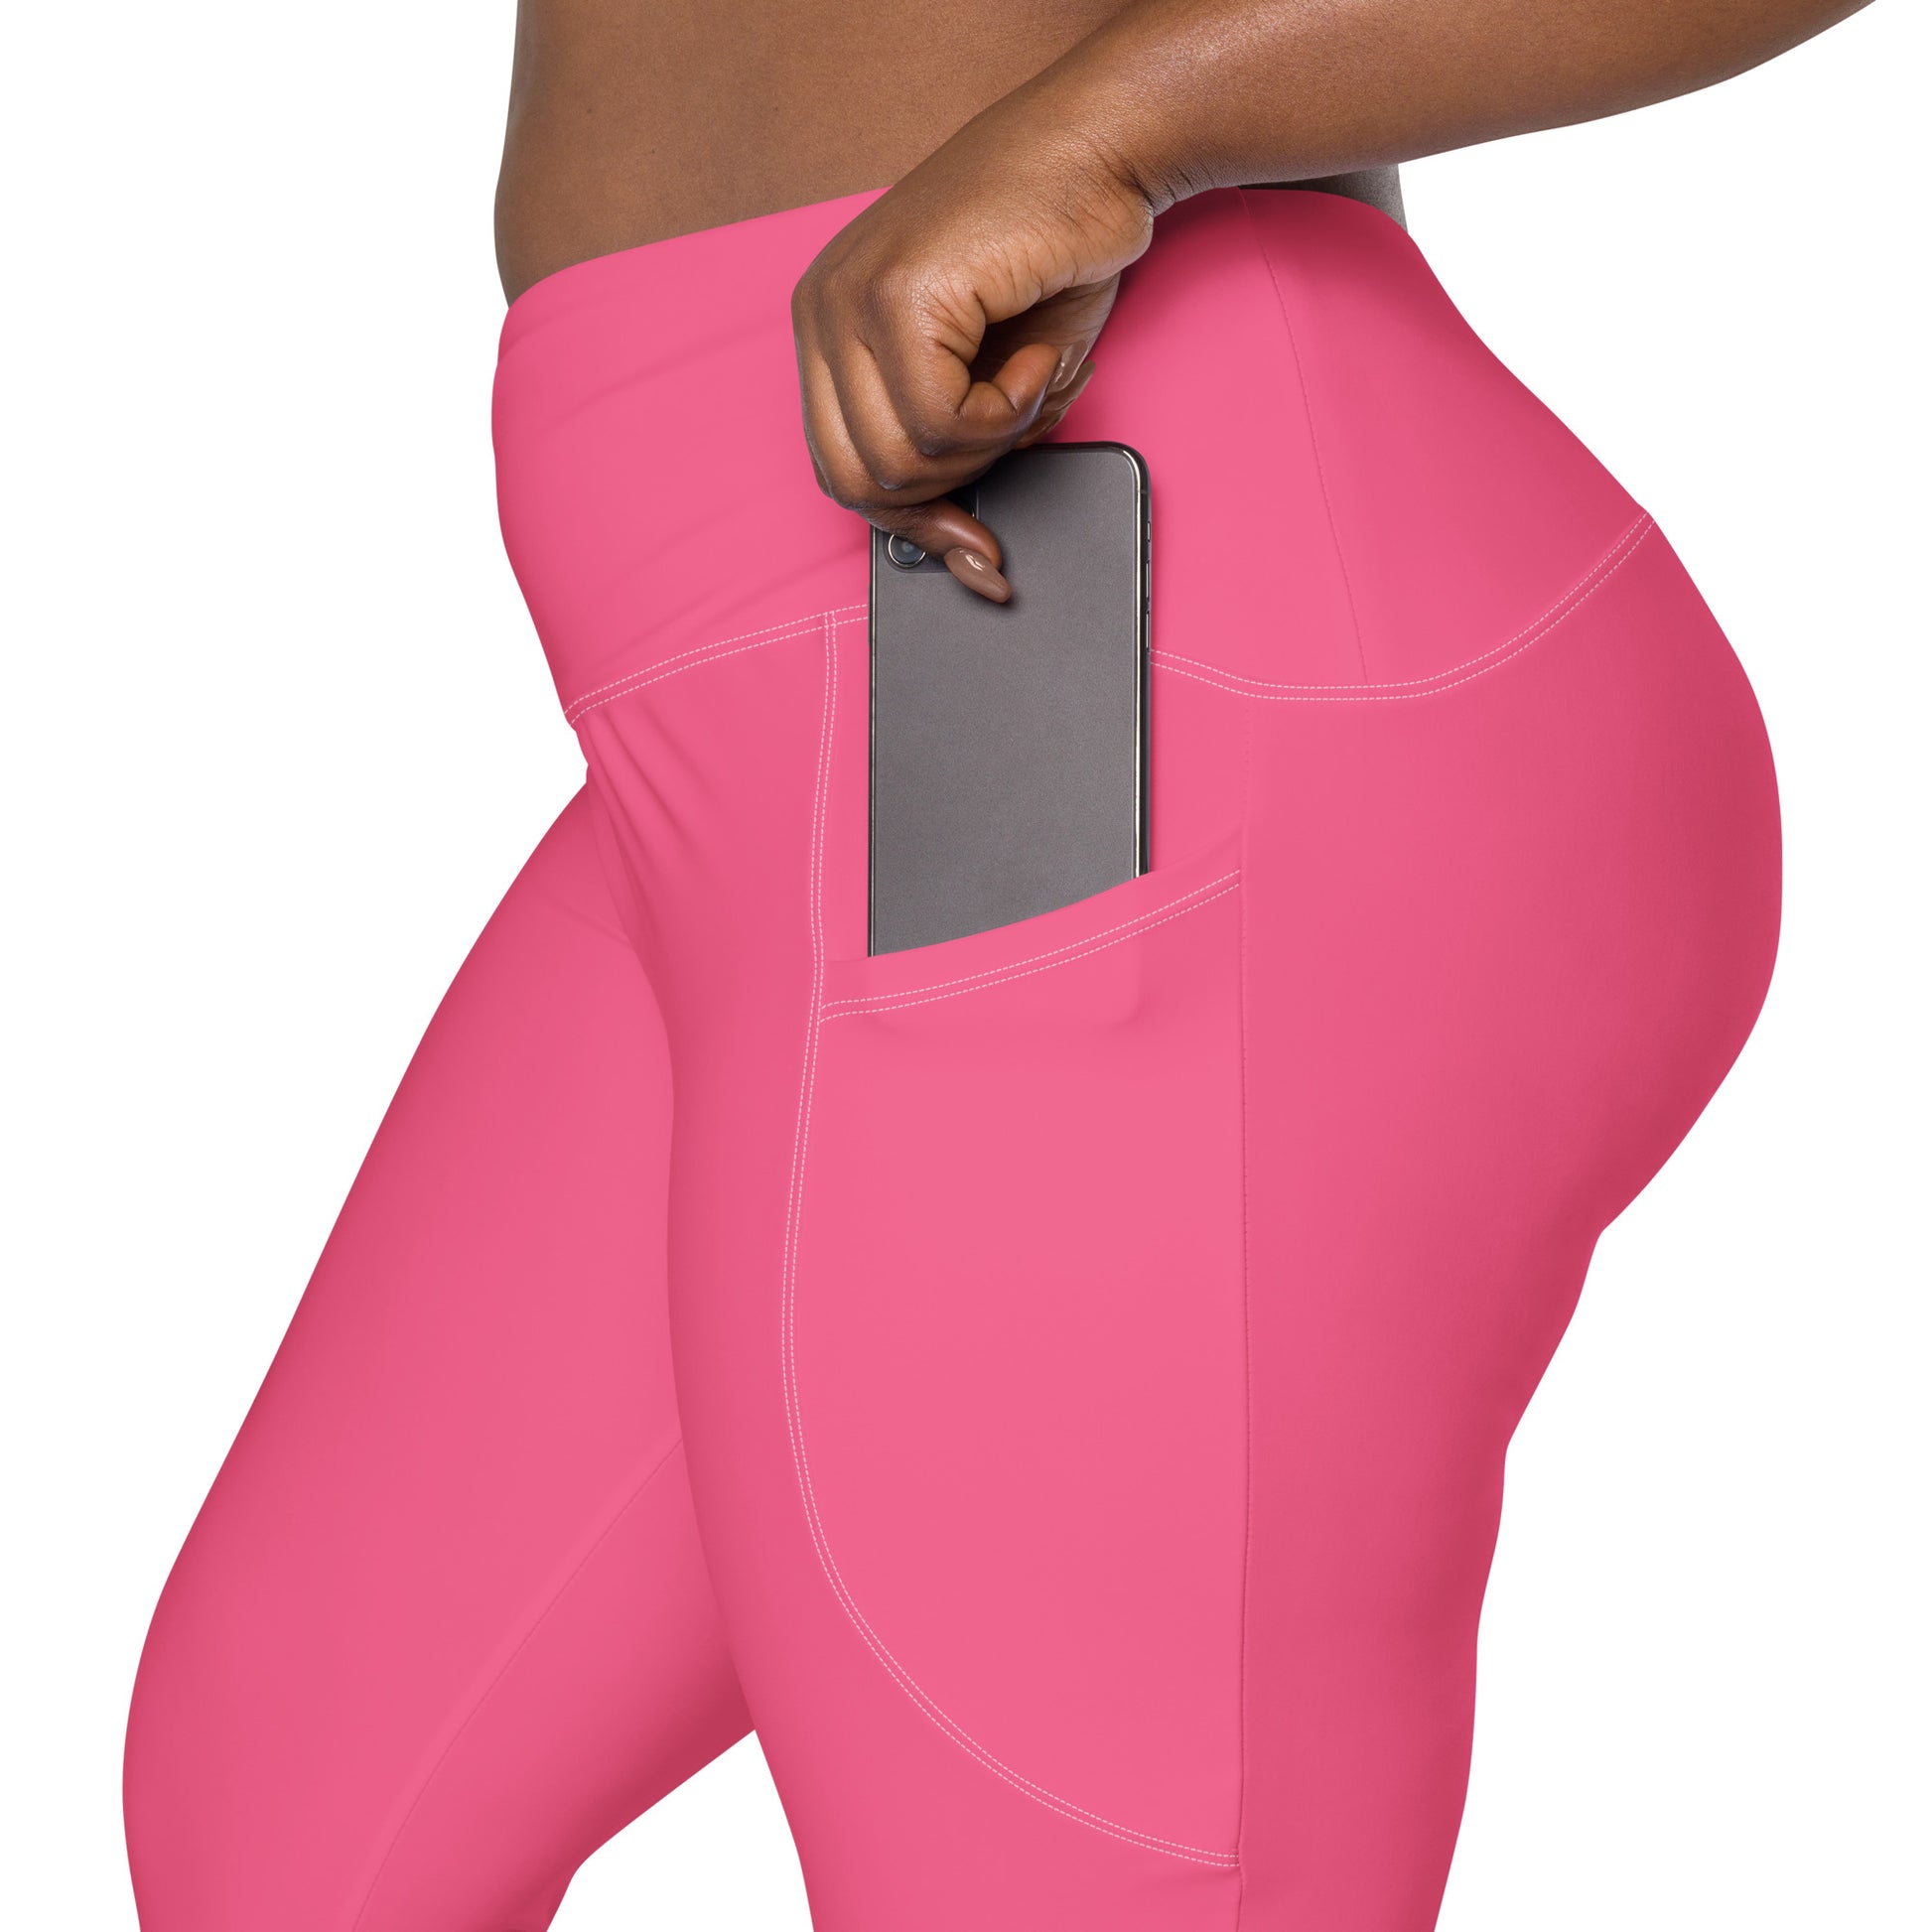 HIGH WAISTED LEGGINGS IN POWDER PINK – Miss Limitless